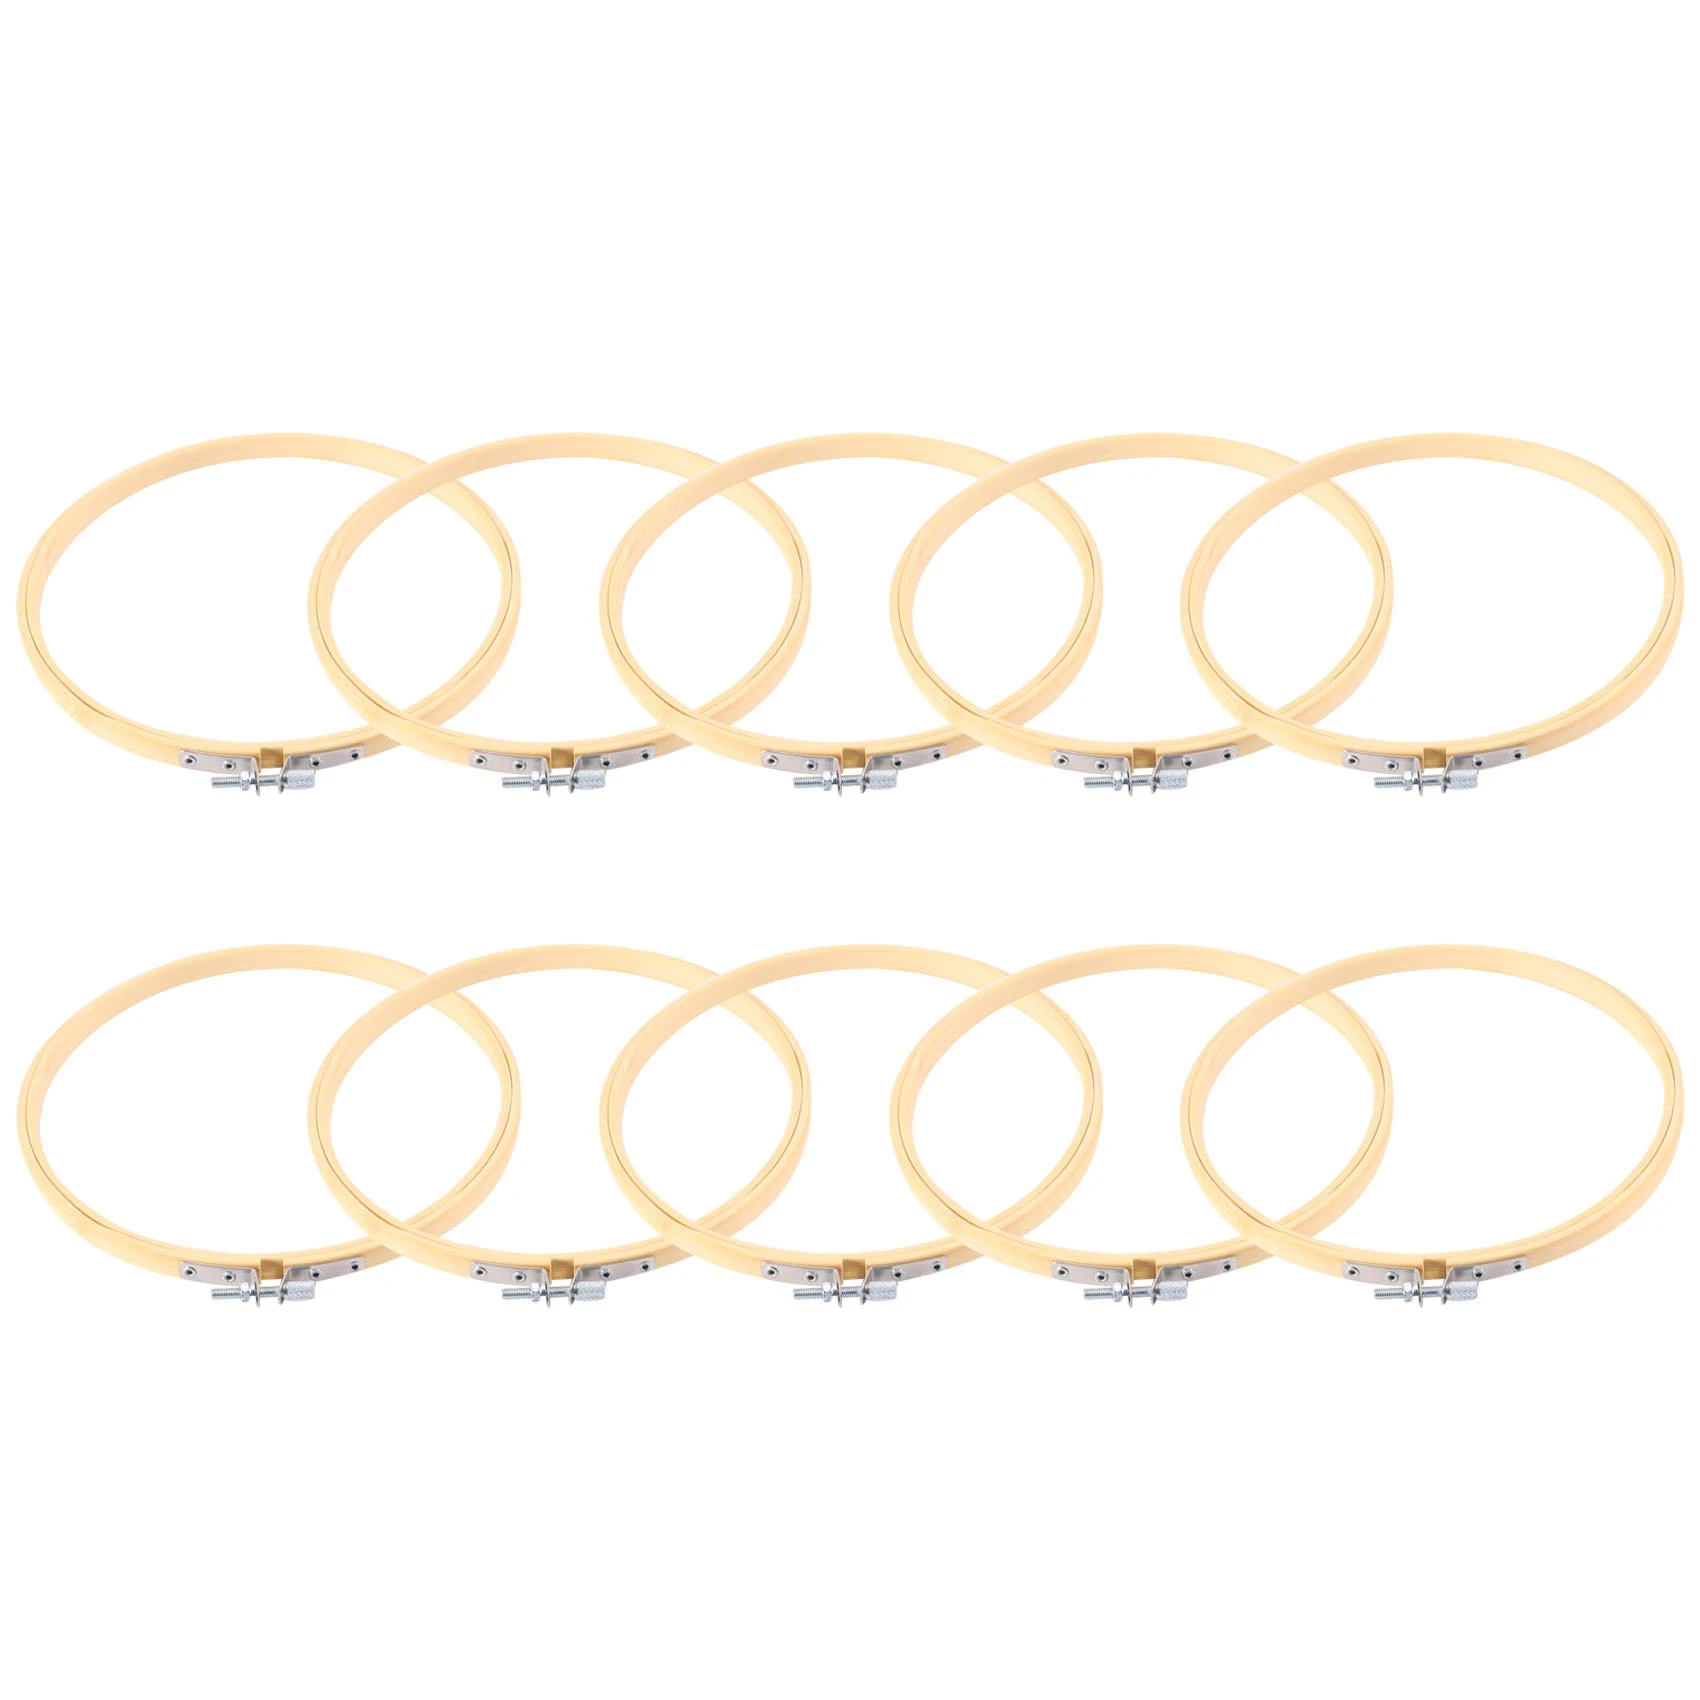 

10 Pieces 6.7inch 17cm Round Wooden Embroidery Hoops Set Bulk Wholesale Adjustable Bamboo Circle Cross Stitch Hoop Ring